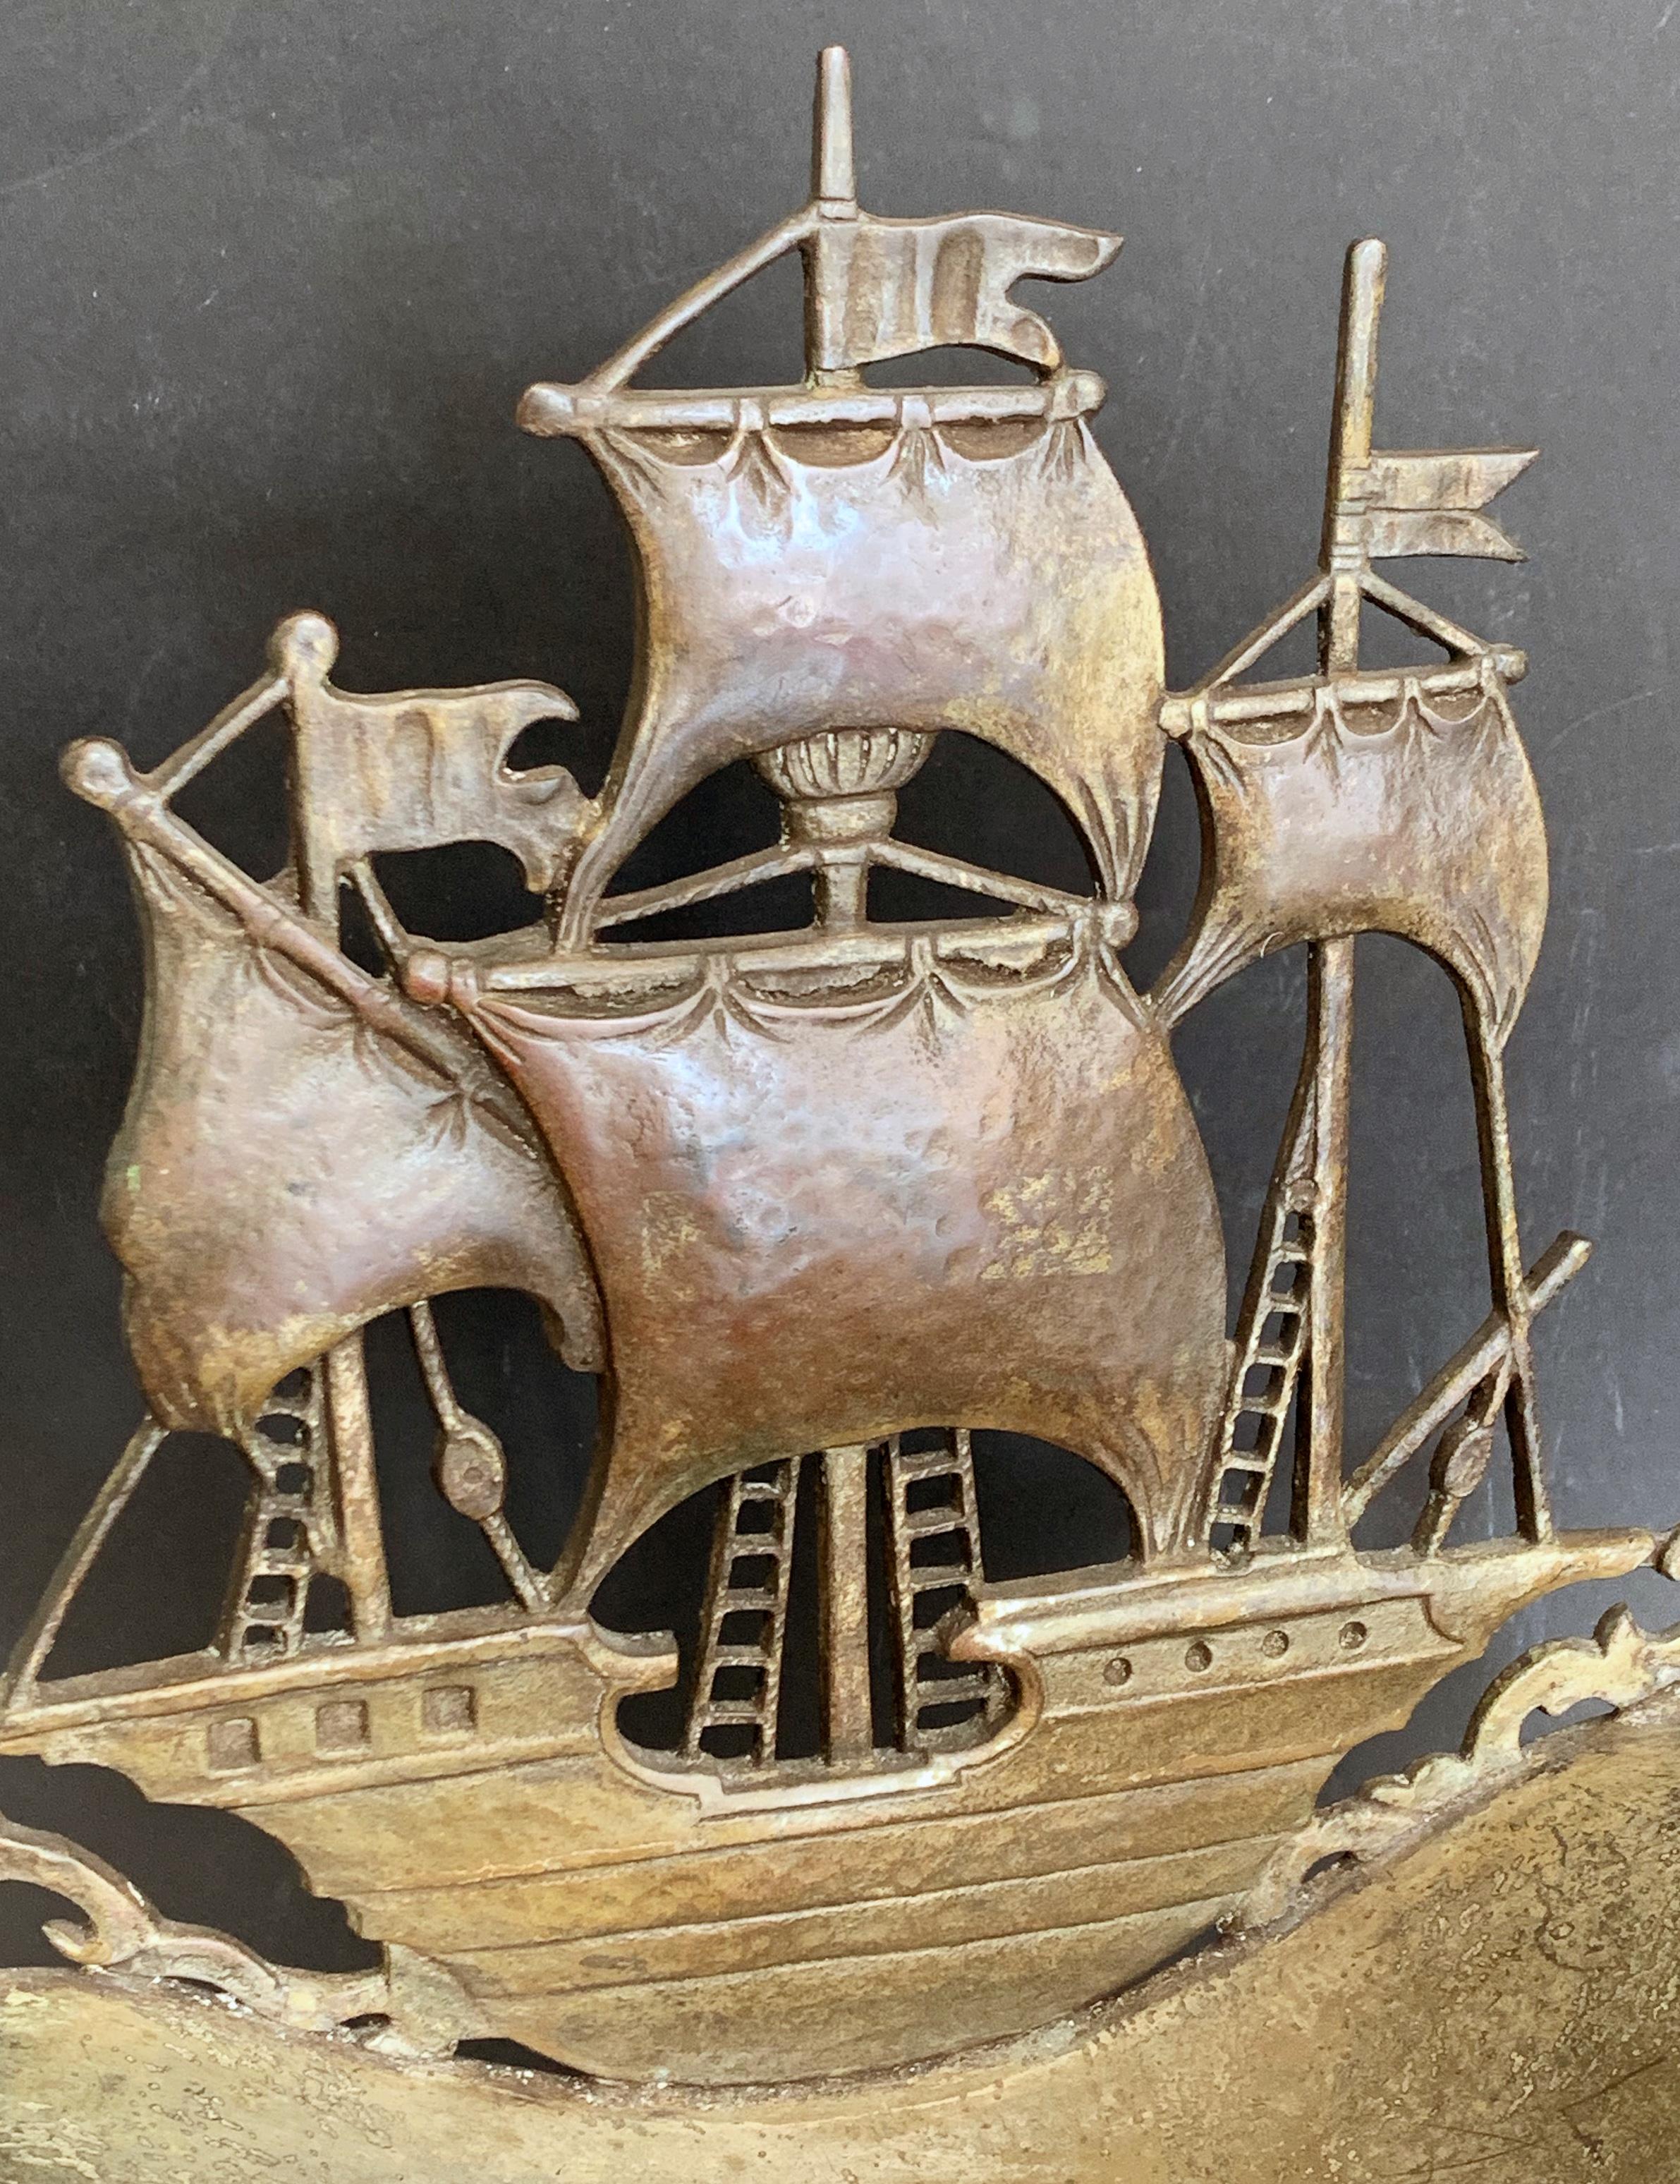 A rare and impressive illustration of the fascination with sailing ships, Mediterranean Revival architecture, and Spanish decorative arts in the 1920s, this marvelous bowl-cum-sculpture features a grand Spanish Galleon overlooking a textured bowl